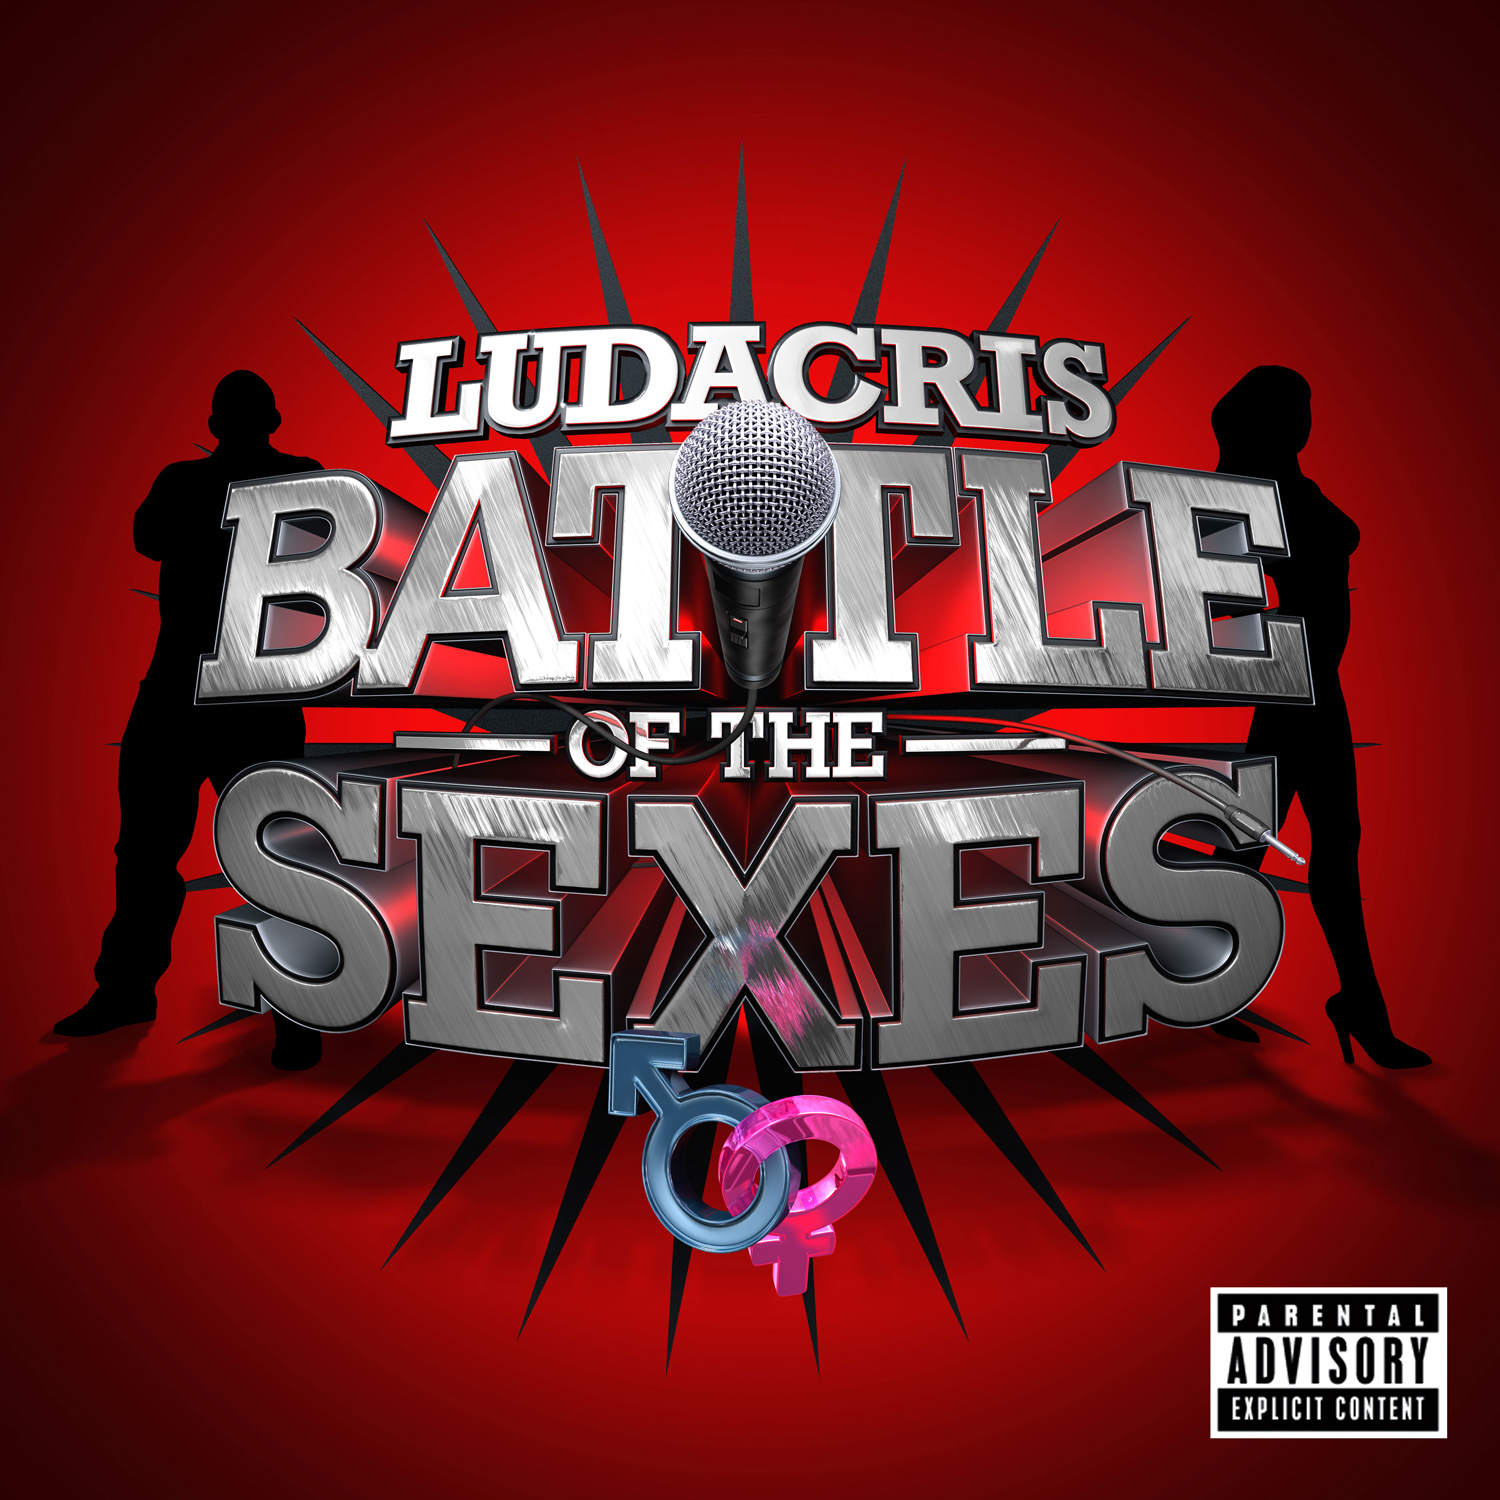 Art for Sex Room by Ludacris